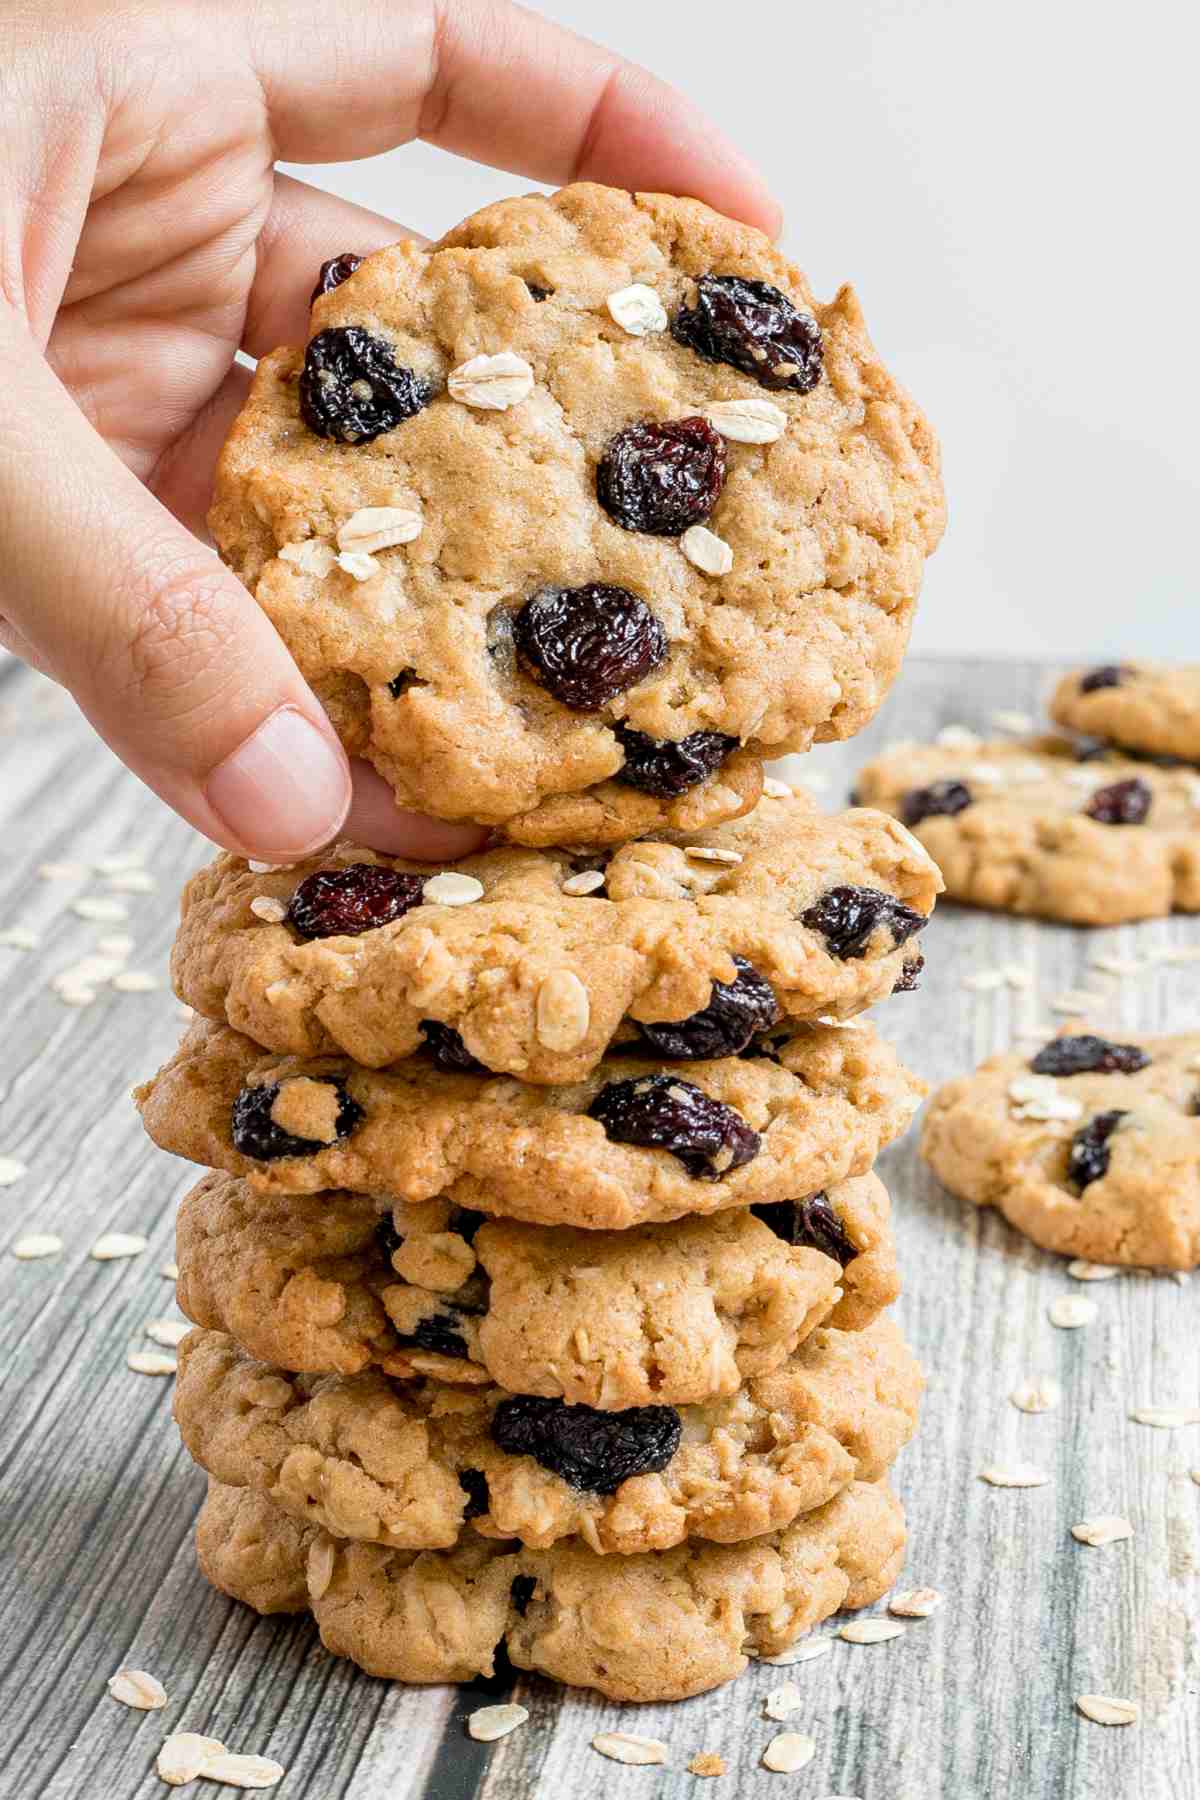 A stack of cookies with oats and raisins on a wooden surface. More oats are sprinkled around them. A hand is taking one from the top.